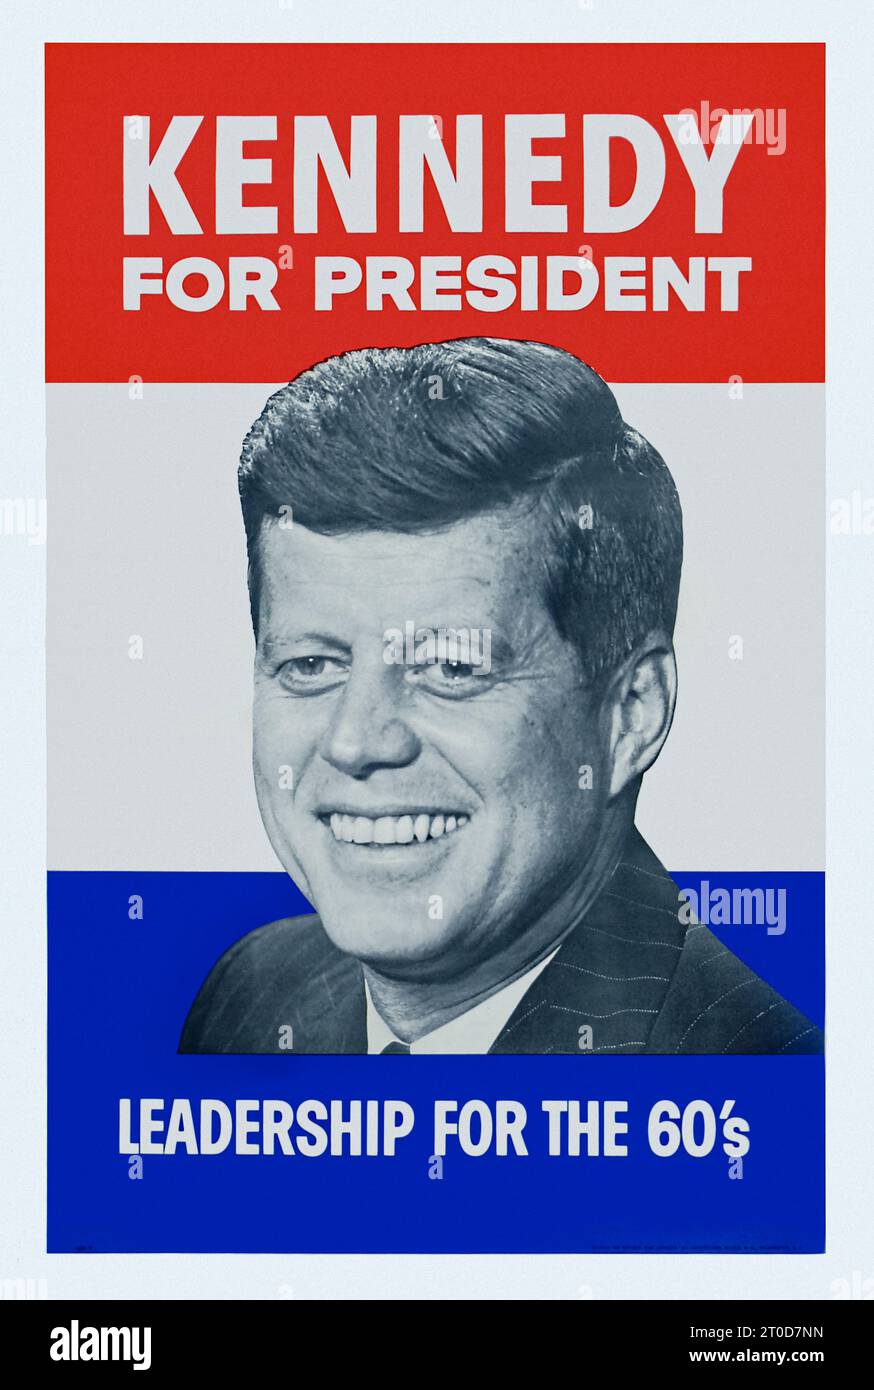 ‘Kennedy For President – Leadership for the 60s’ 1960 campaign poster produced by Citizens for Kennedy and Johnson. Stock Photo